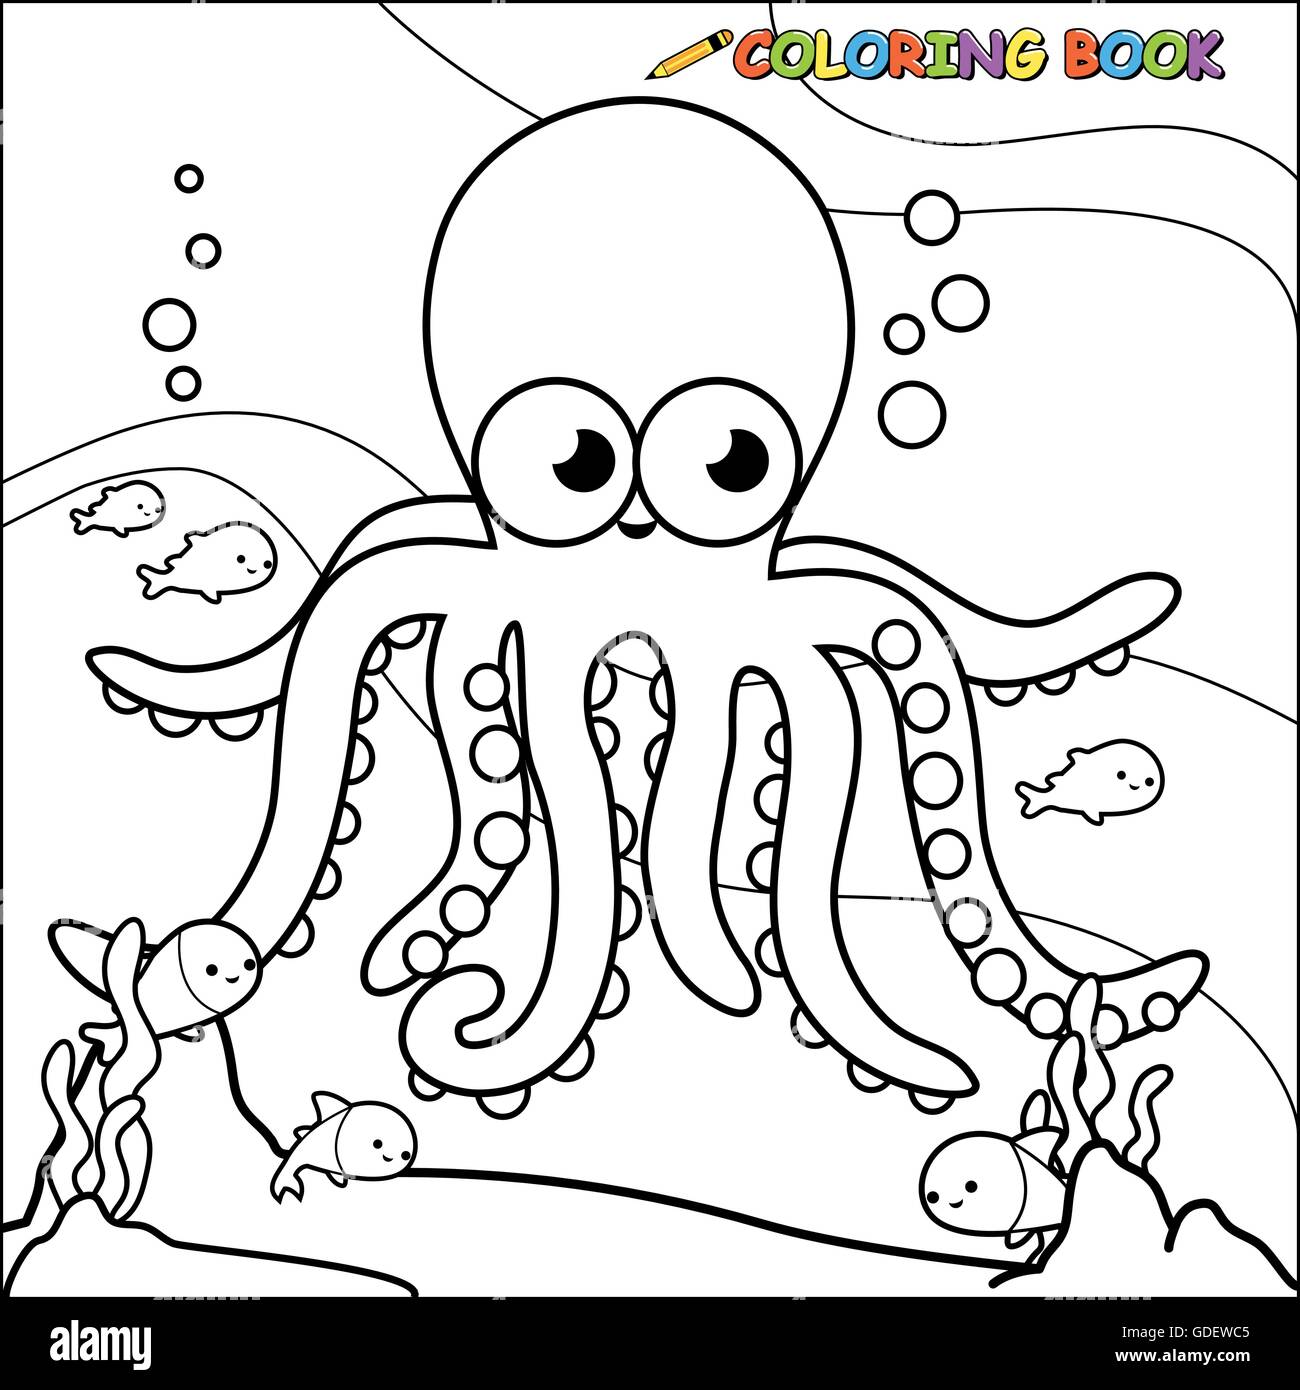 Vector Illustration of a black and white outline image of an octopus ...